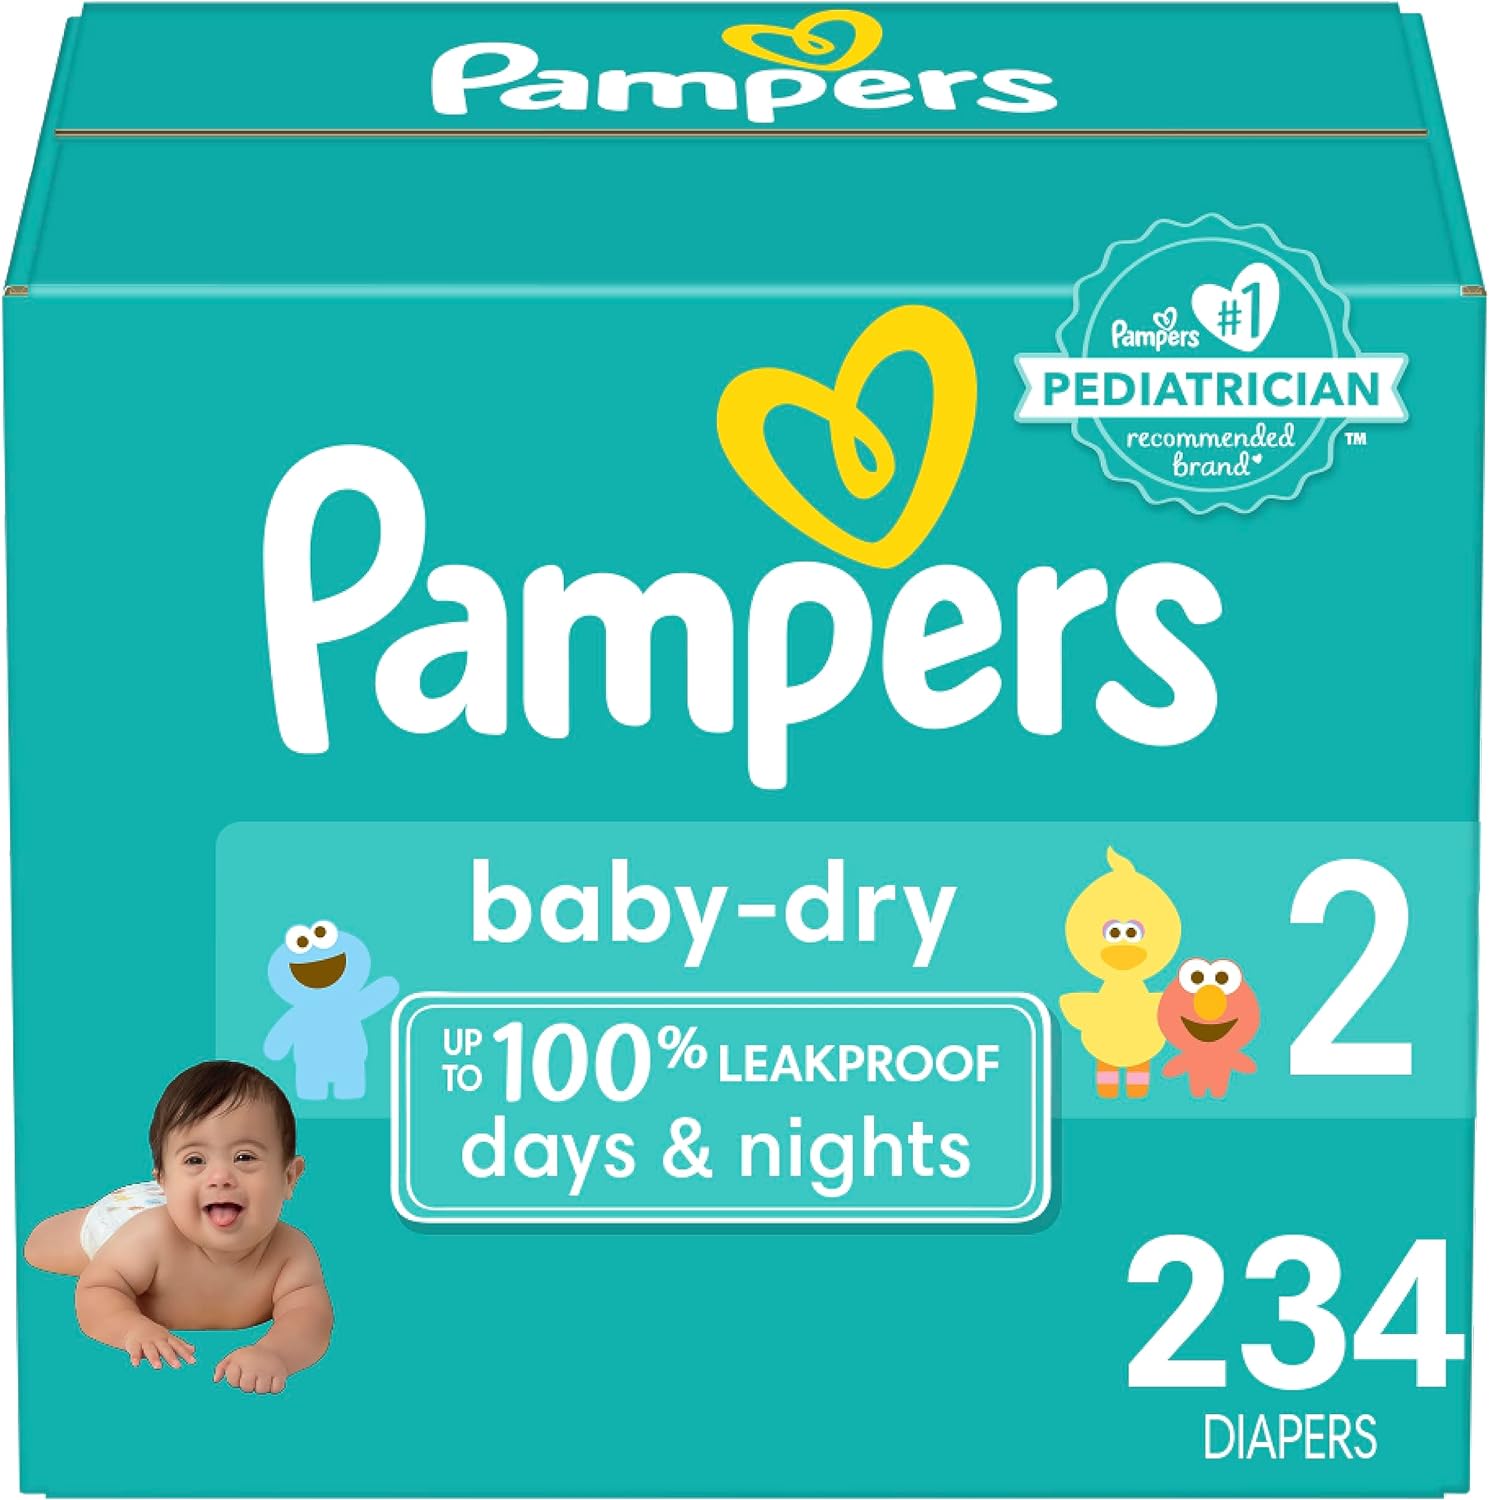 price of pampers for baby in poland